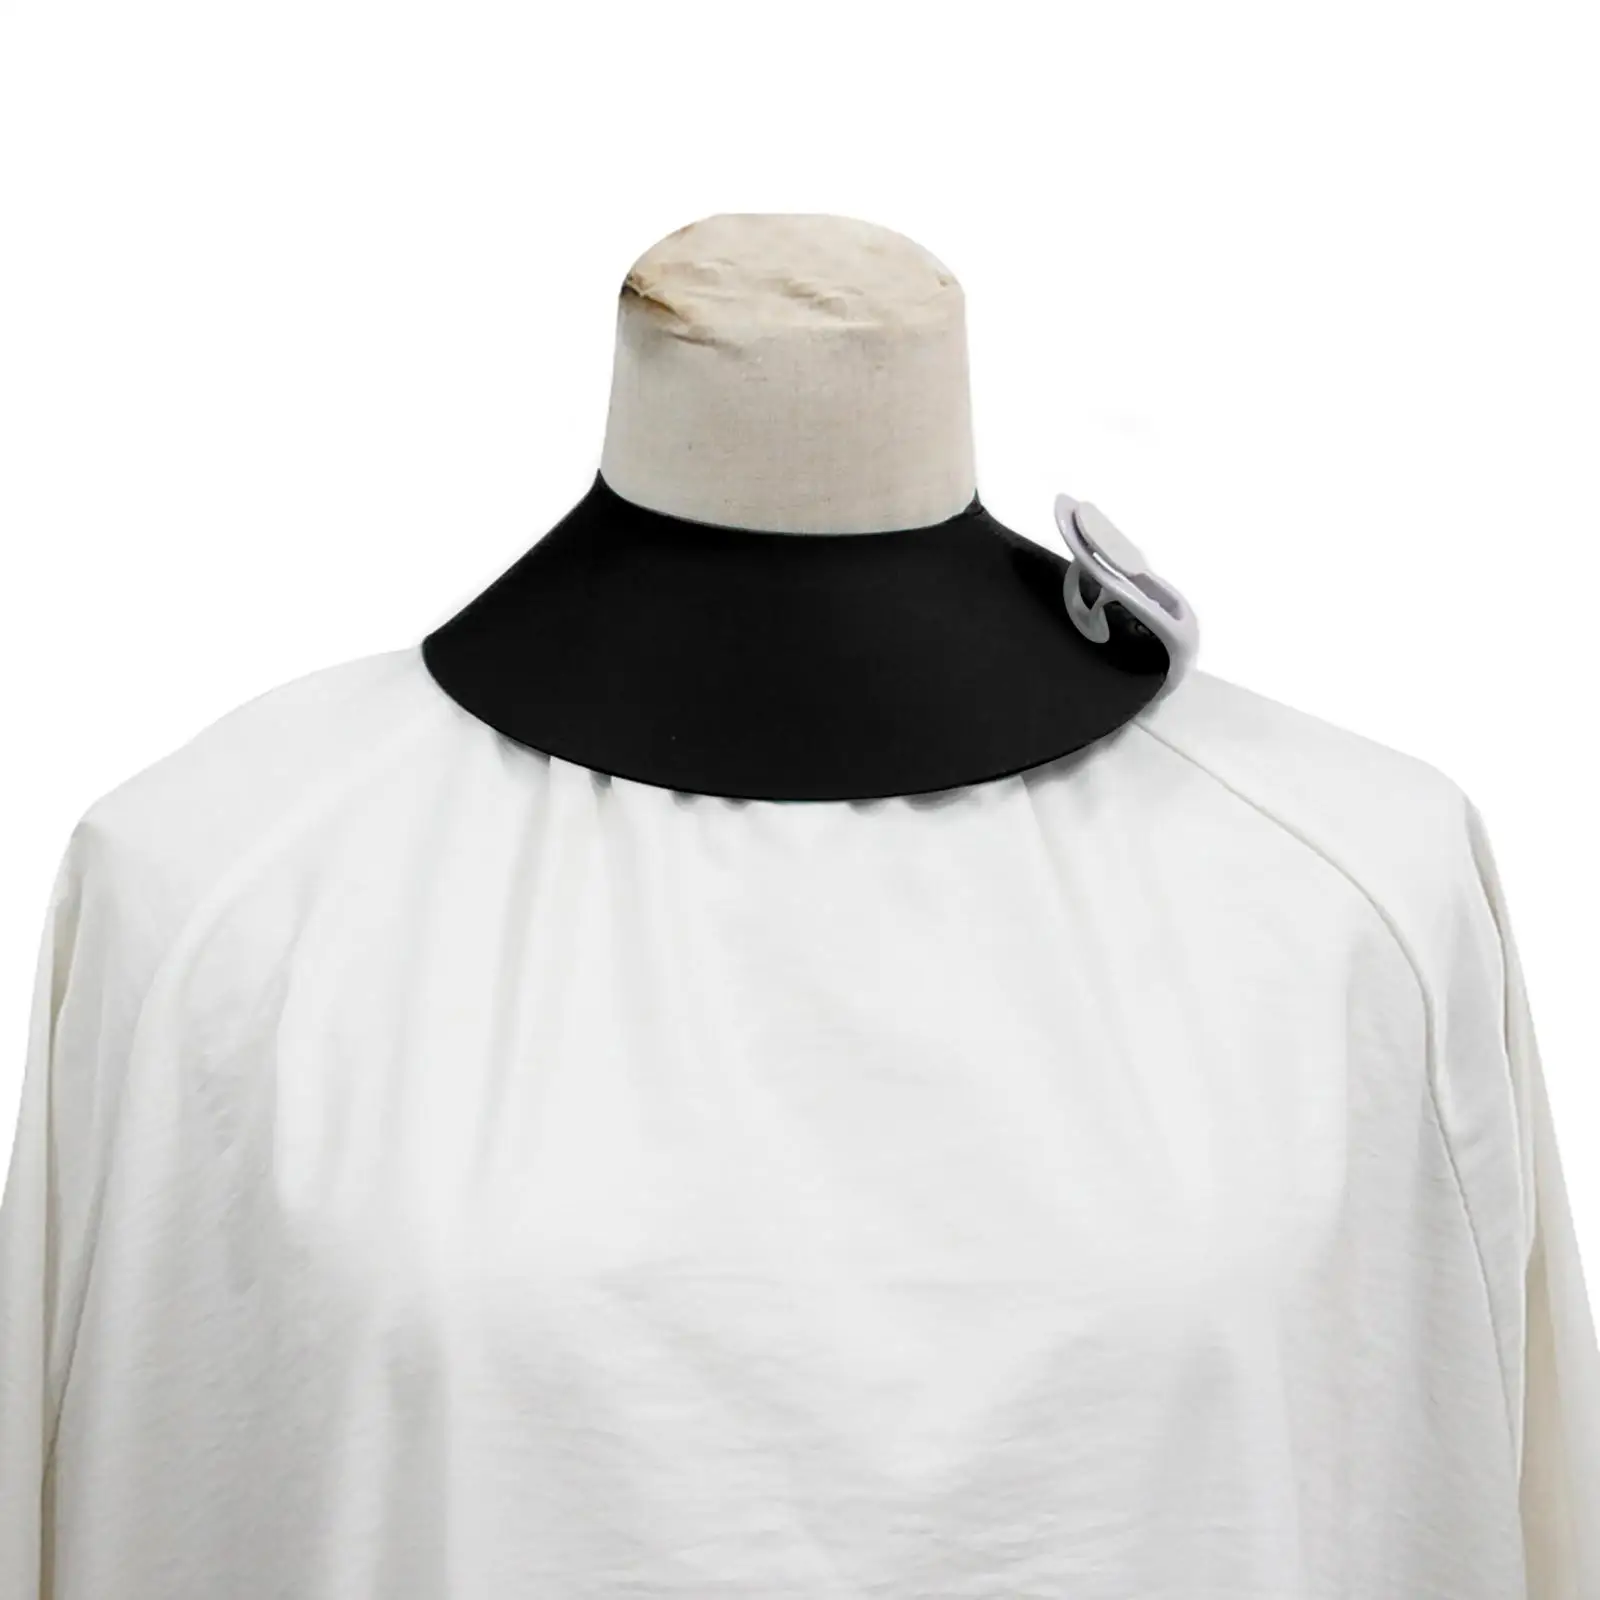 Cutting Collar Neck Shield with Buckles Adjustable for Hairdressing Women